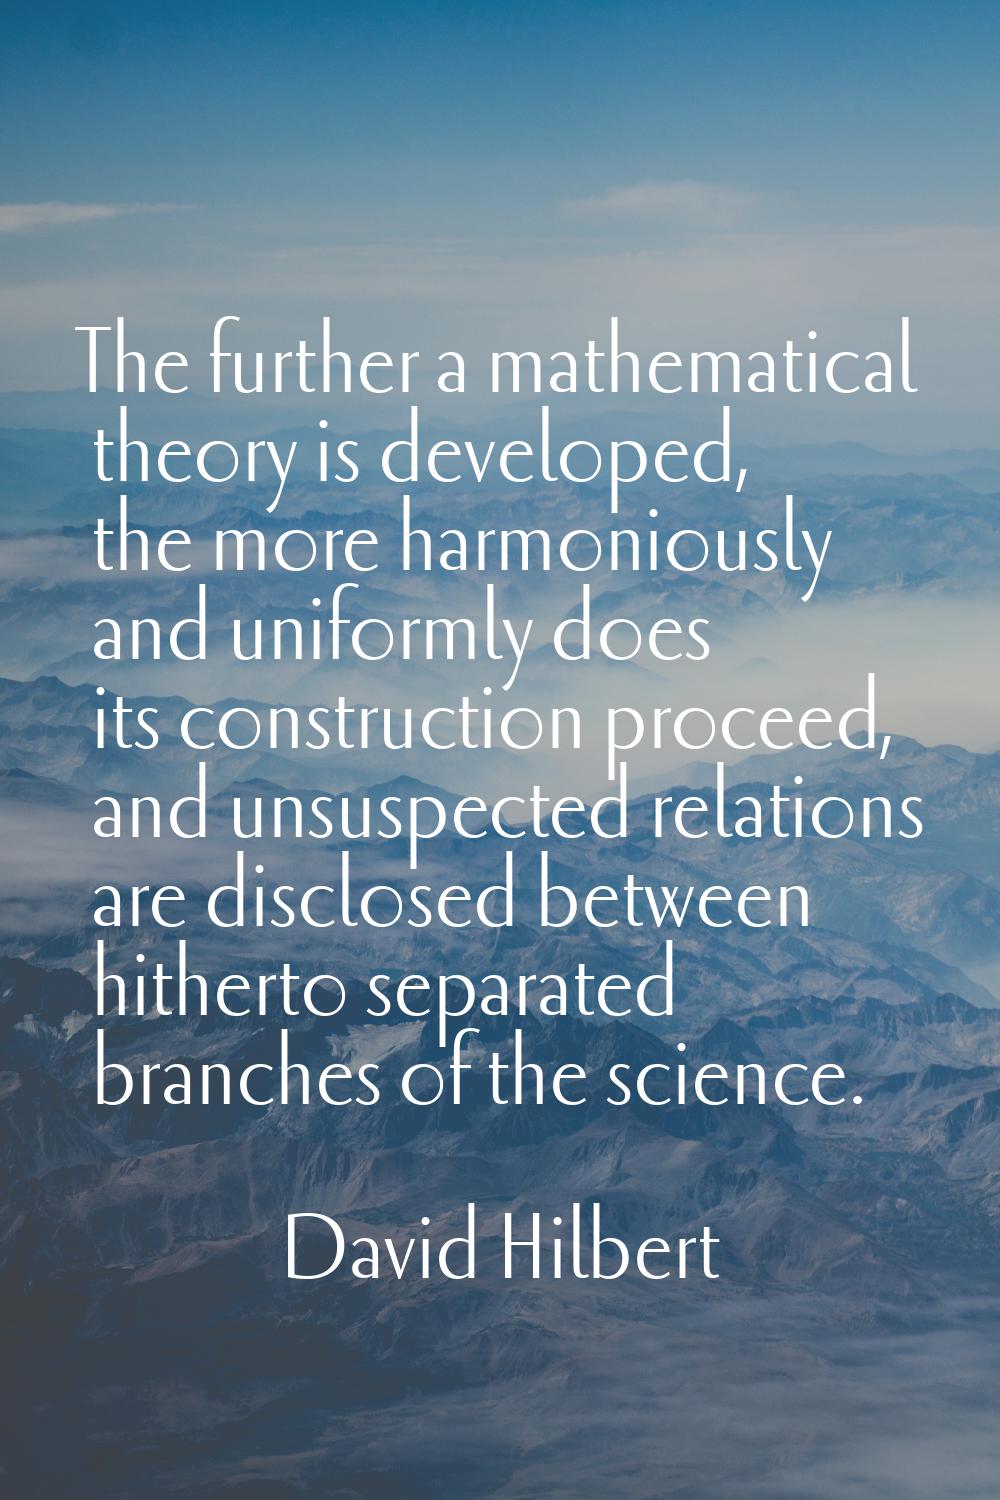 The further a mathematical theory is developed, the more harmoniously and uniformly does its constr